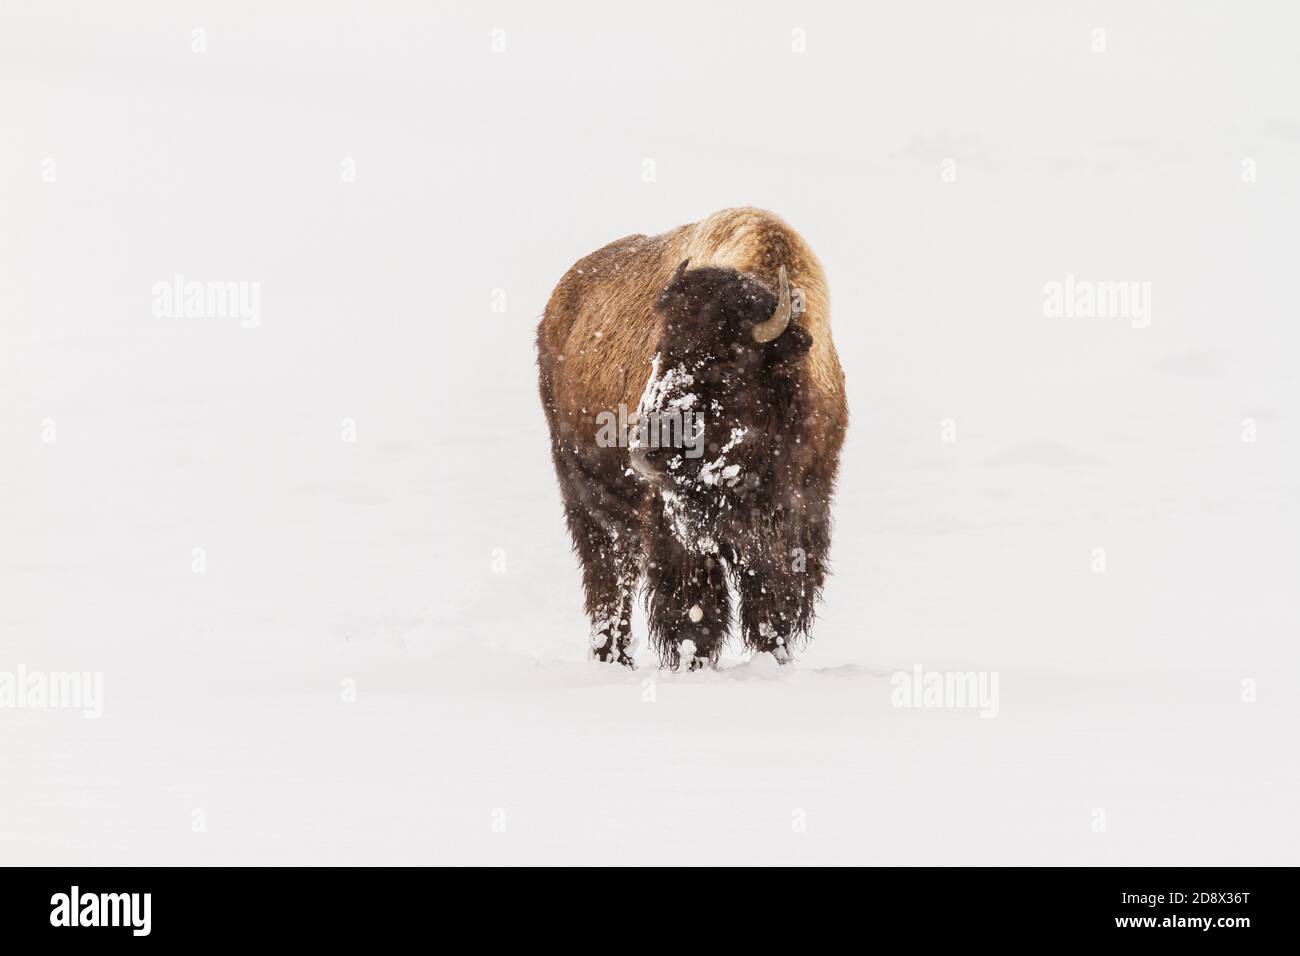 An American bison in a snowstorm in Yellowstone National Park, Wyoming, USA. Stock Photo